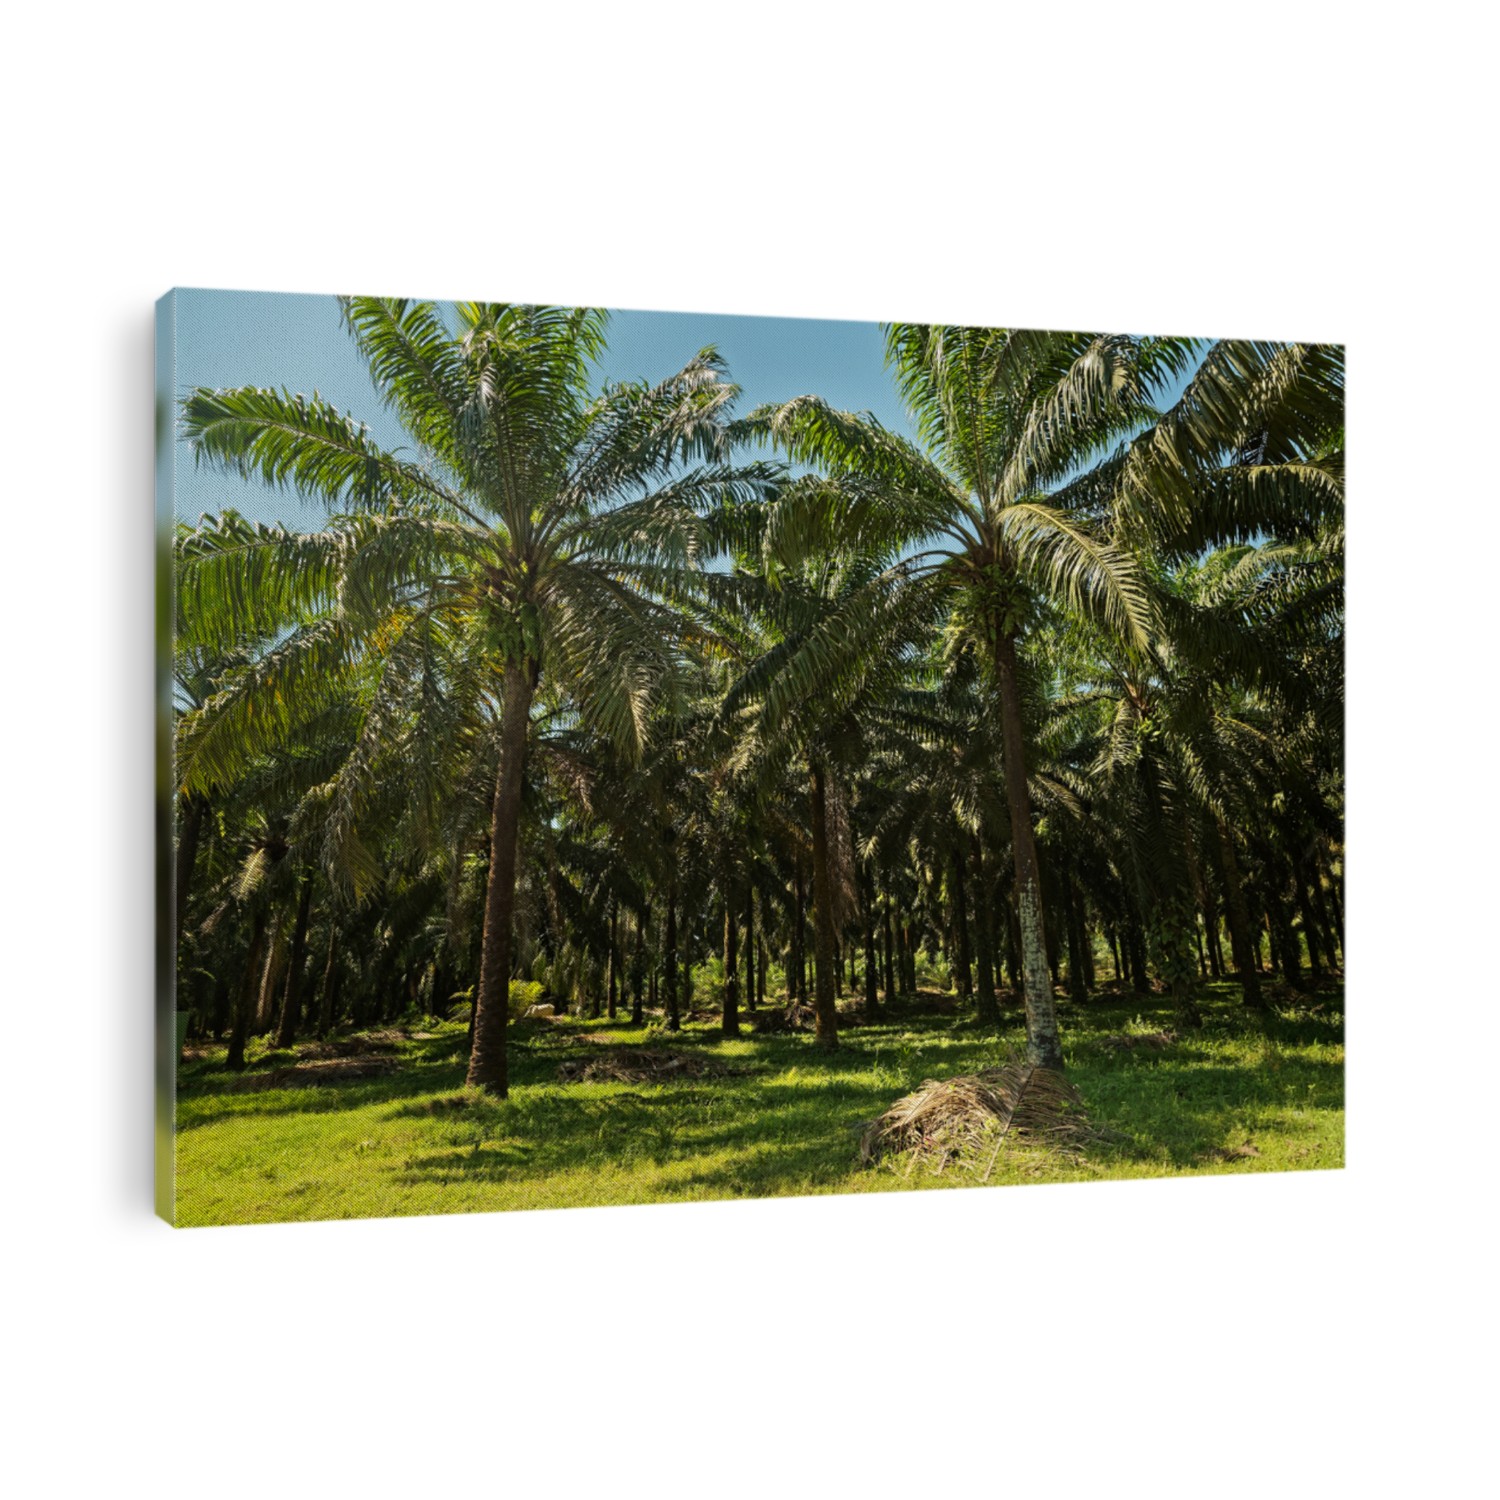 Oil Palm. The American oil palm Elaeis oleifera (from Latin oleifer, meaning 'oil-producing') is native to tropical Central and South America, is used locally for oil production